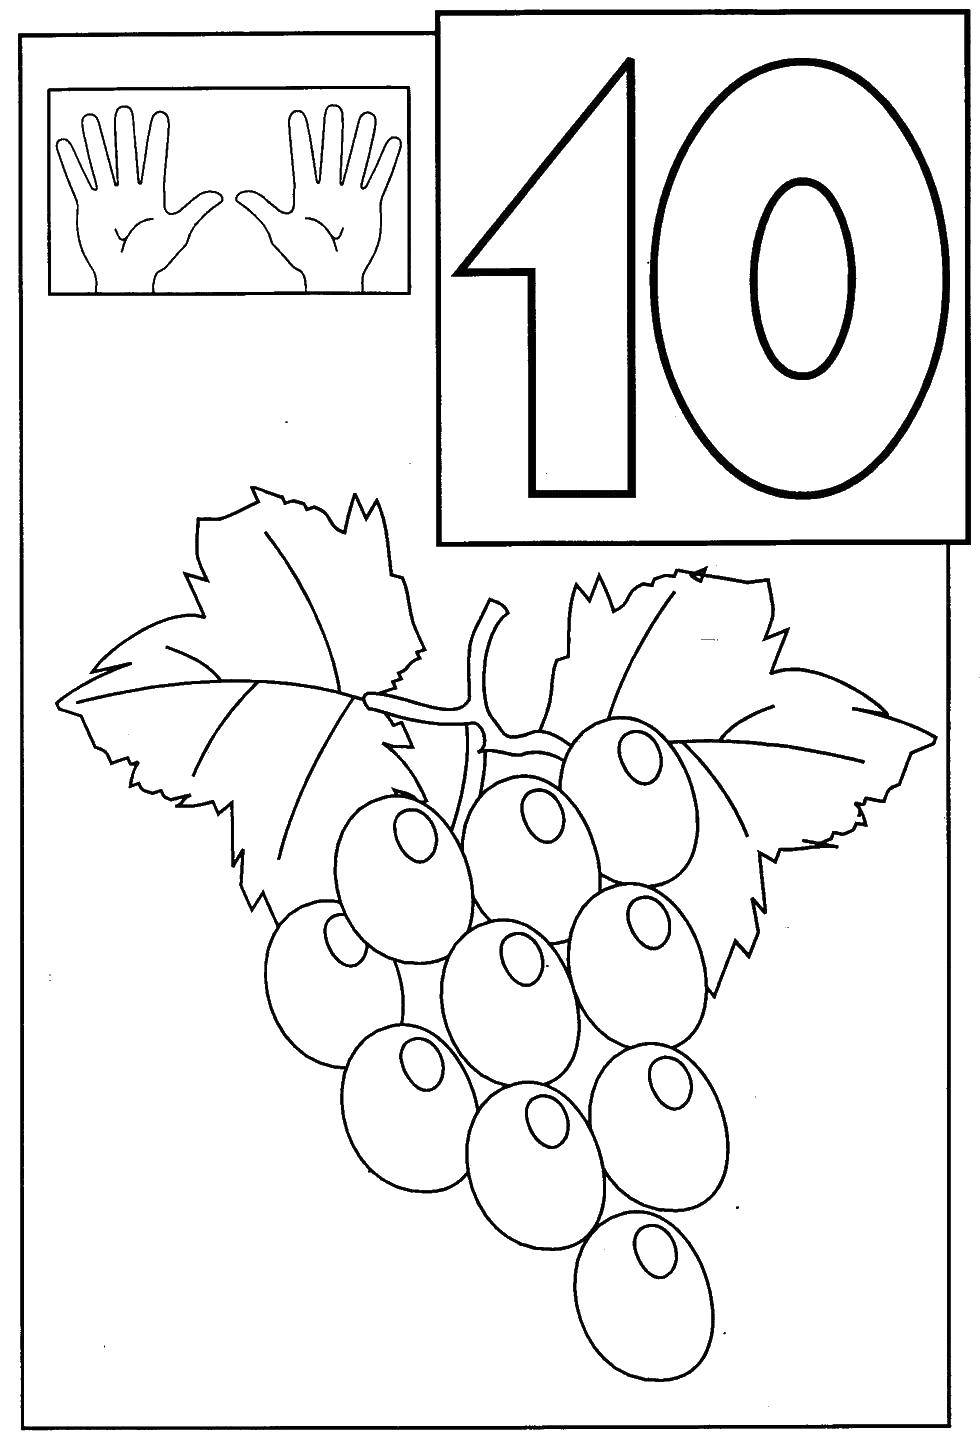 Coloring 10 grapes. Category berries. Tags:  berries, grapes 10.